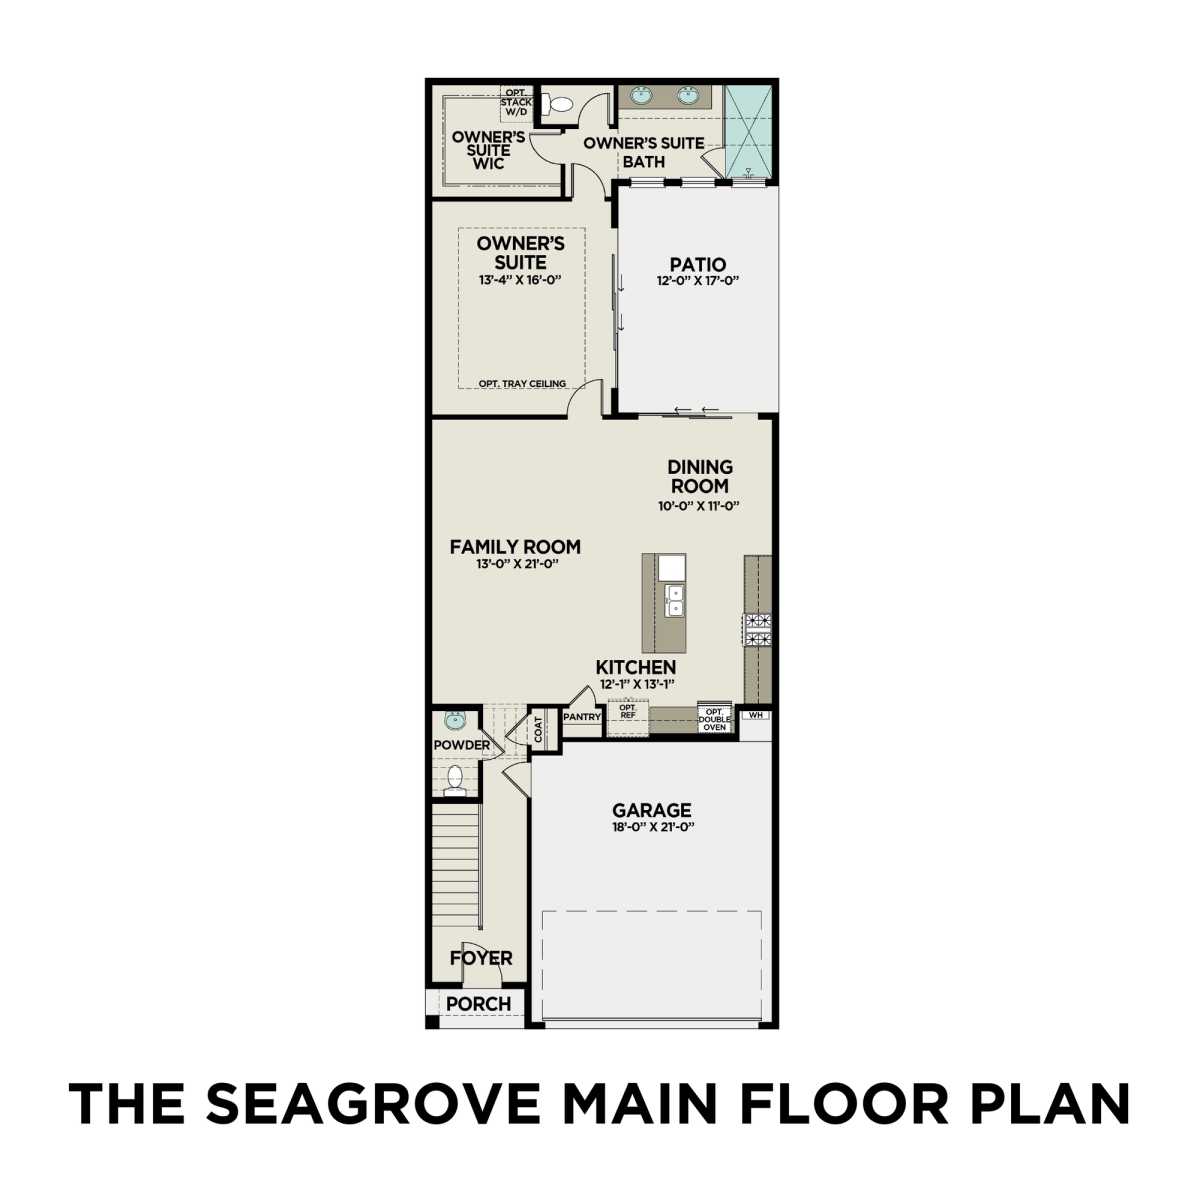 1 - The Seagrove A floor plan layout for 646 Stickley Oak Way in Davidson Homes' The Village at Towne Lake community.